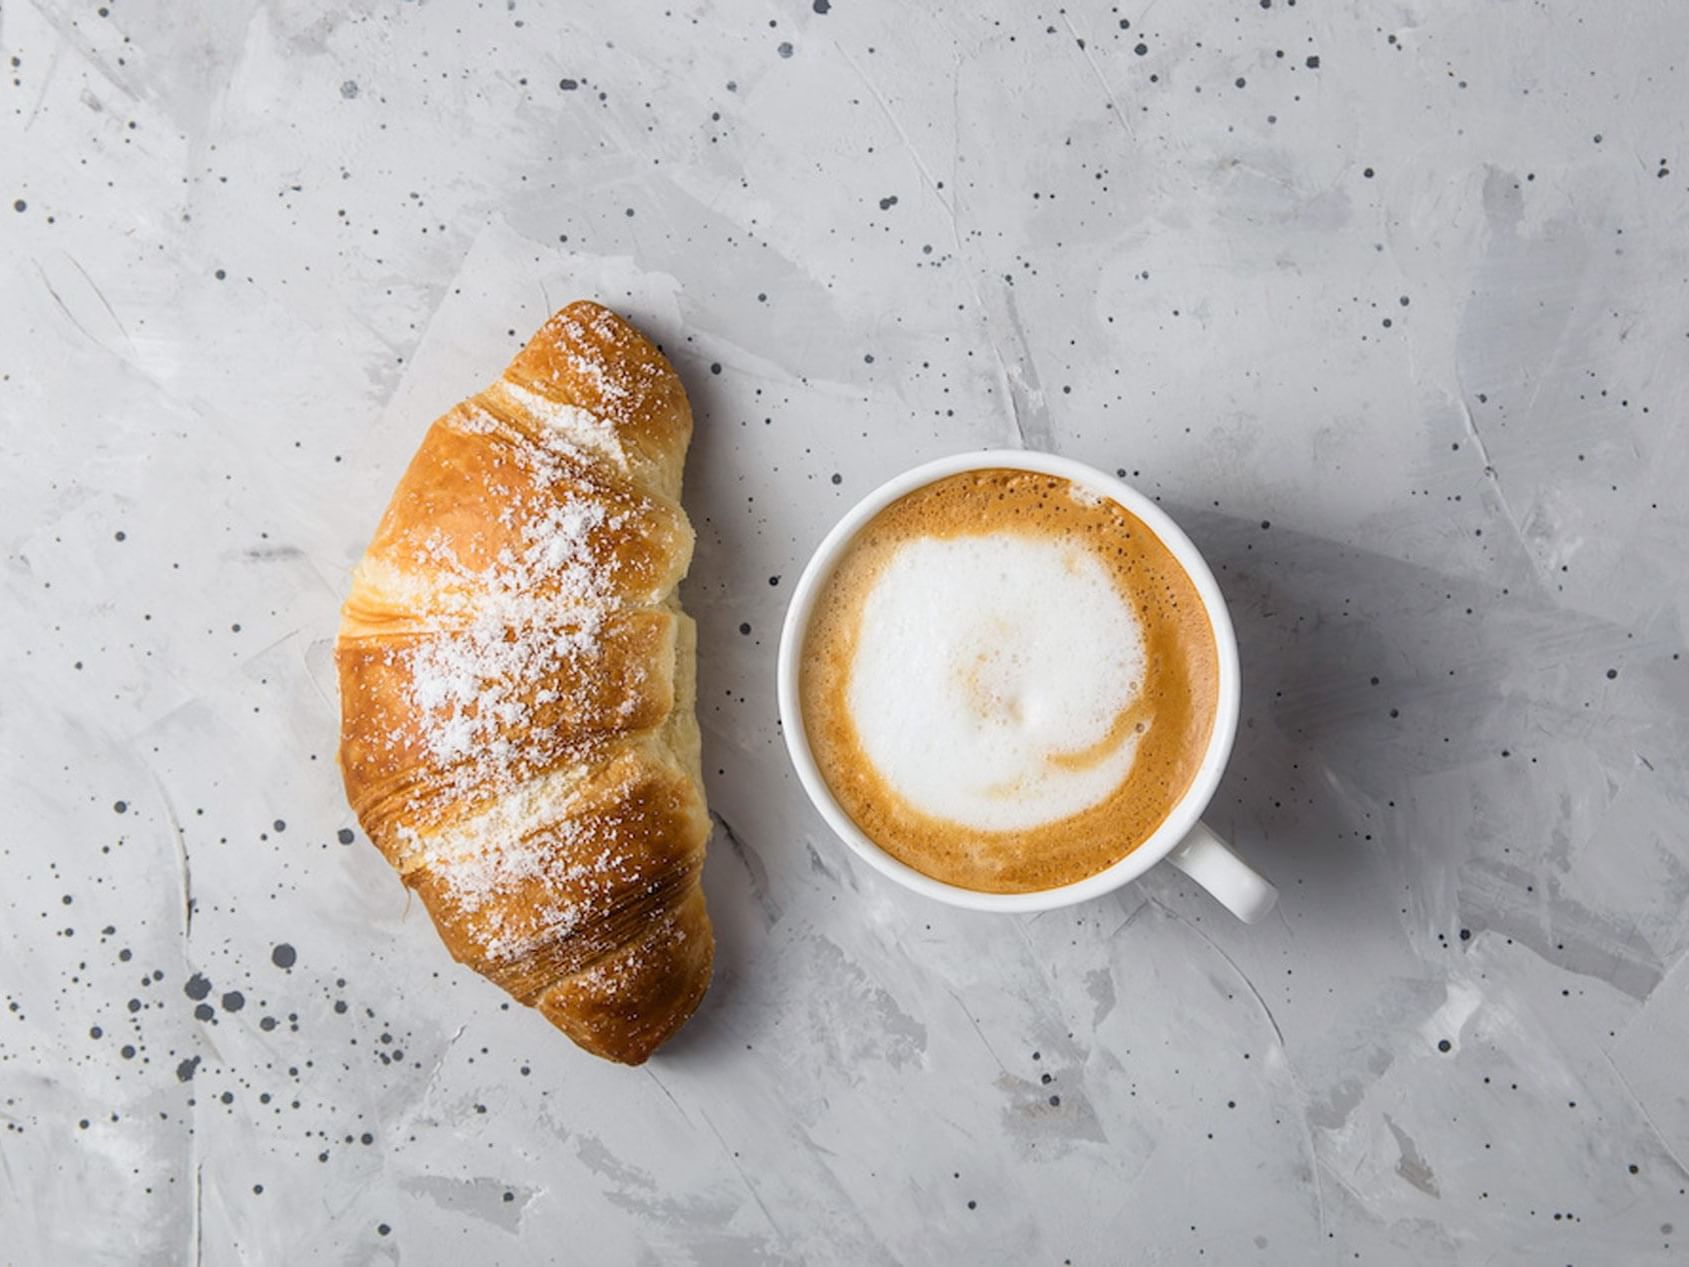 a cup of coffee and a croissant